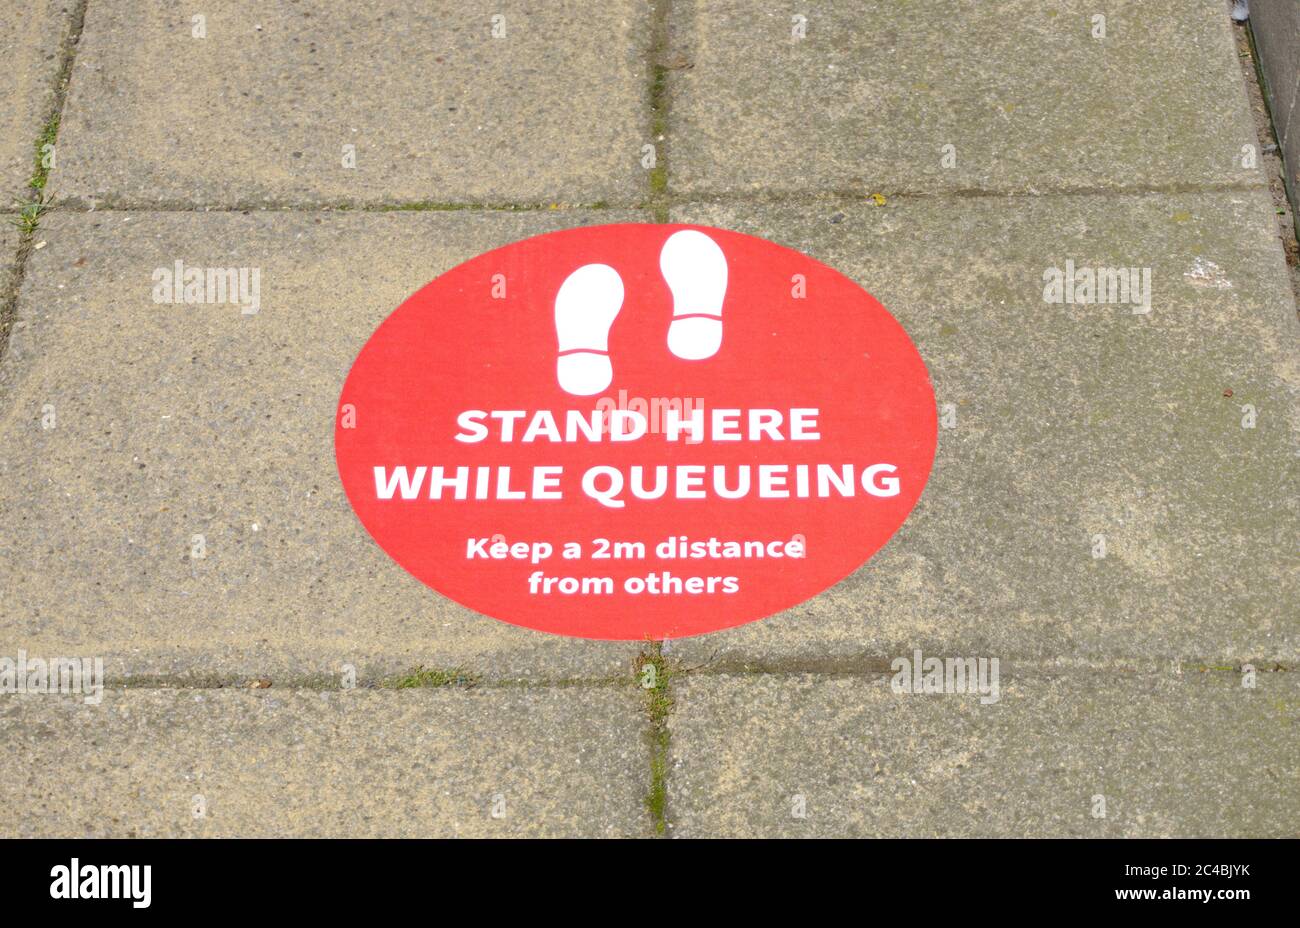 Sign on pavement outside a UK bank advising customers two keep a two metre gap while queuing during the COVID-19 coronoavirus pandemic. Stock Photo